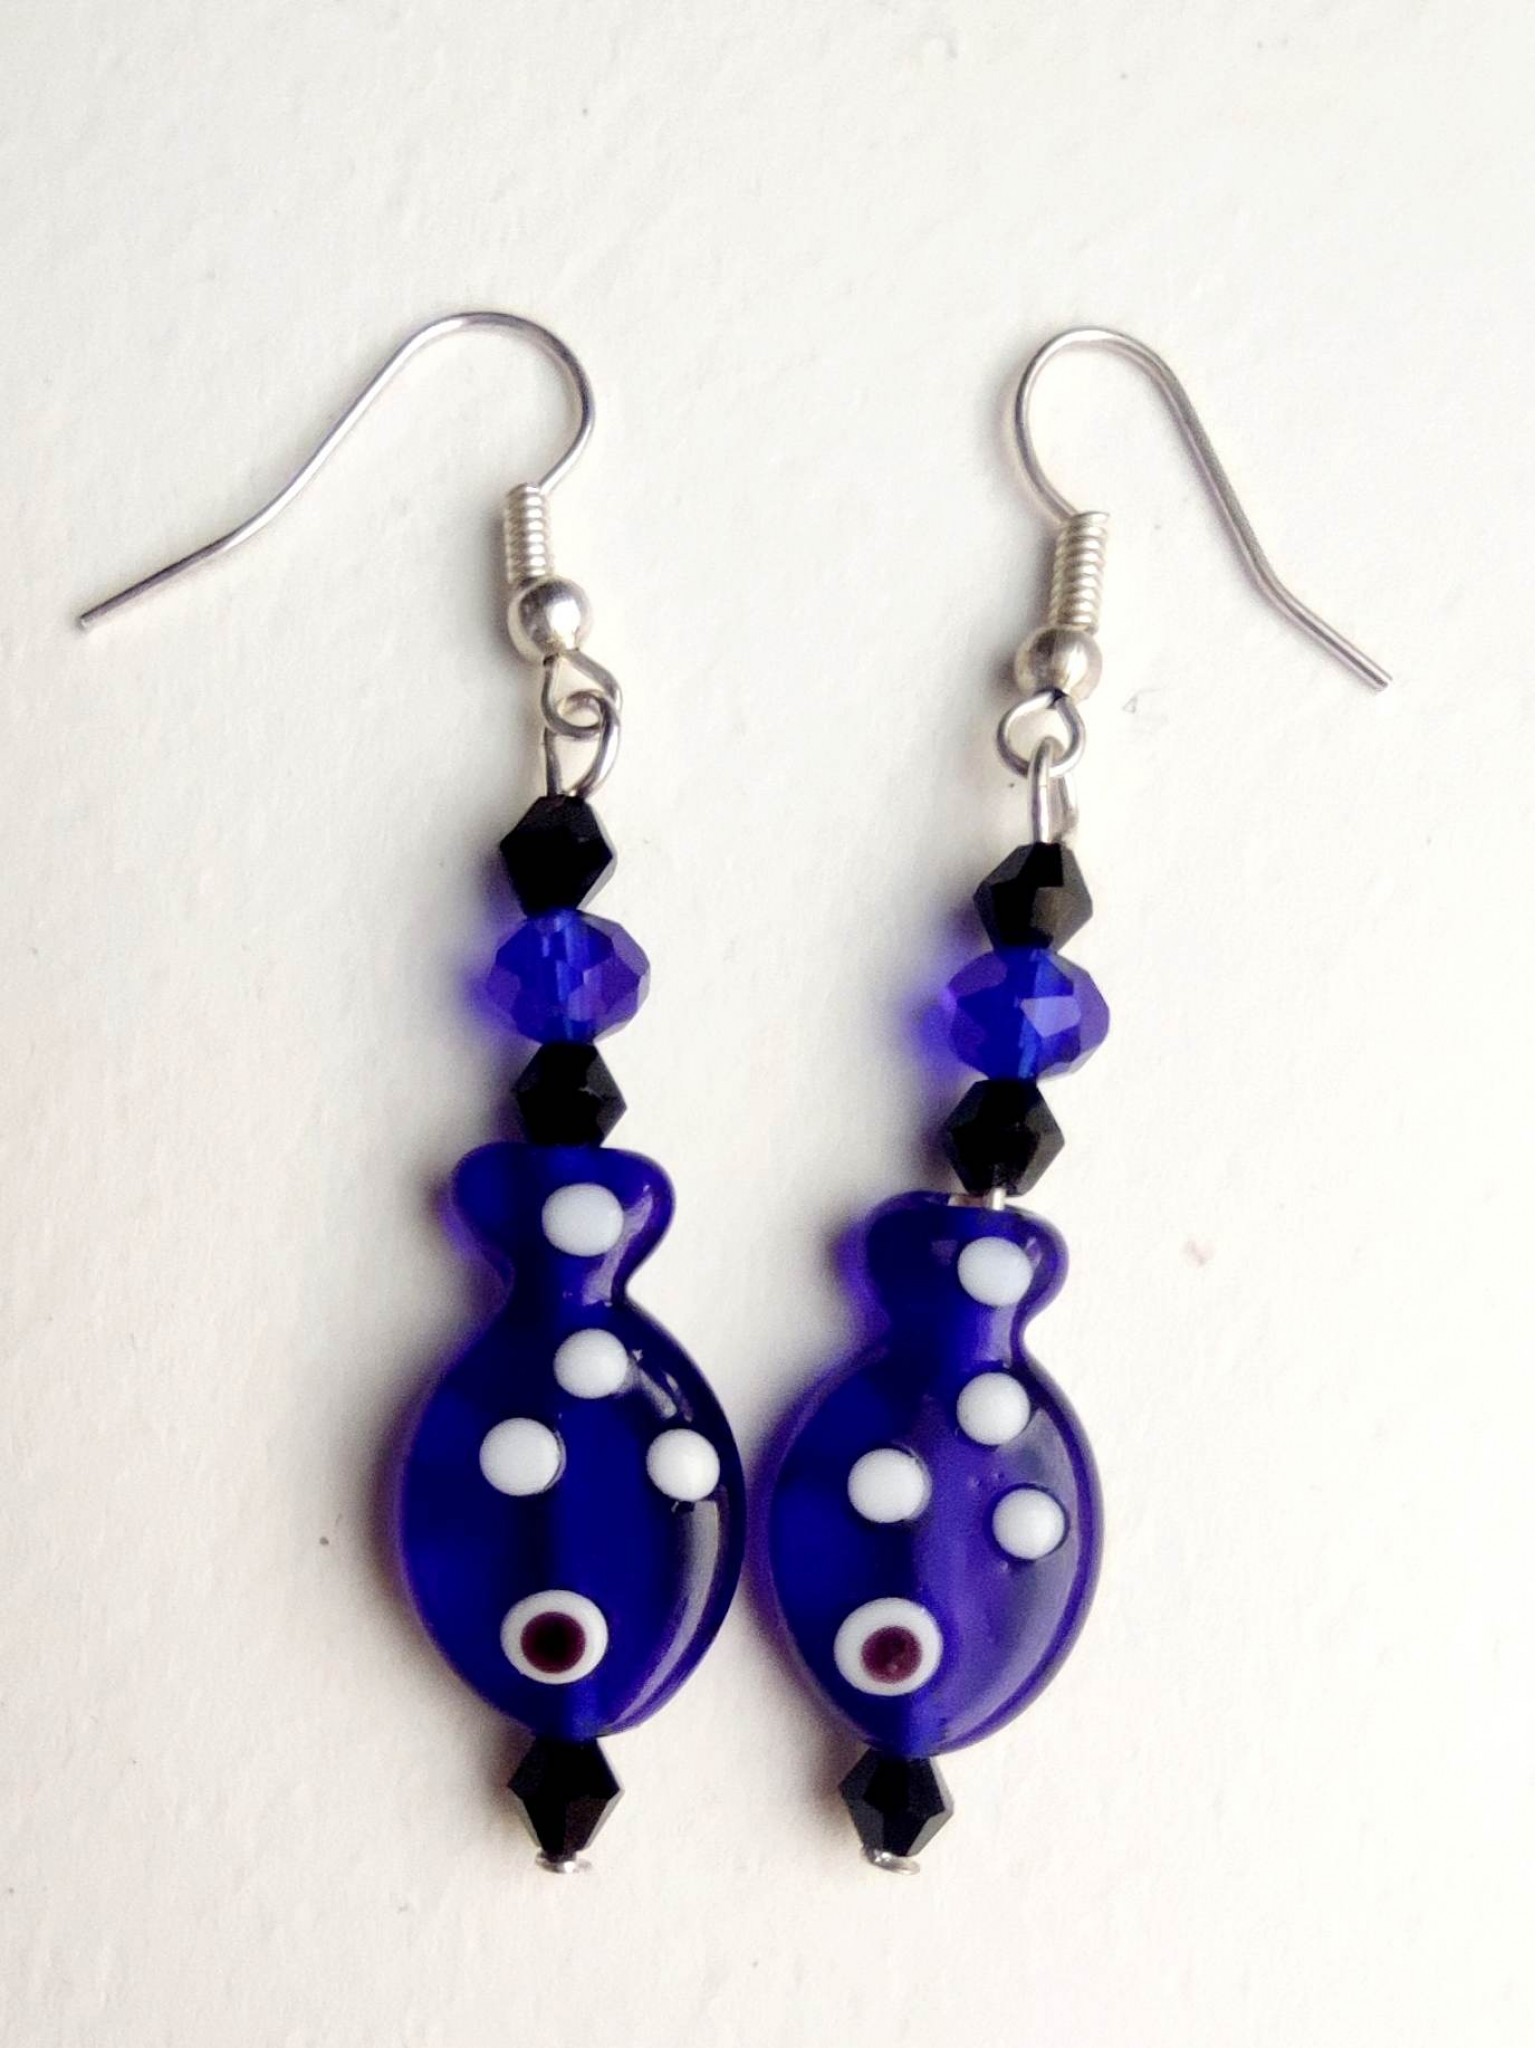 Hand-made magical earrings with glass and crystals for attracting money and wealth - "Blue Fish"